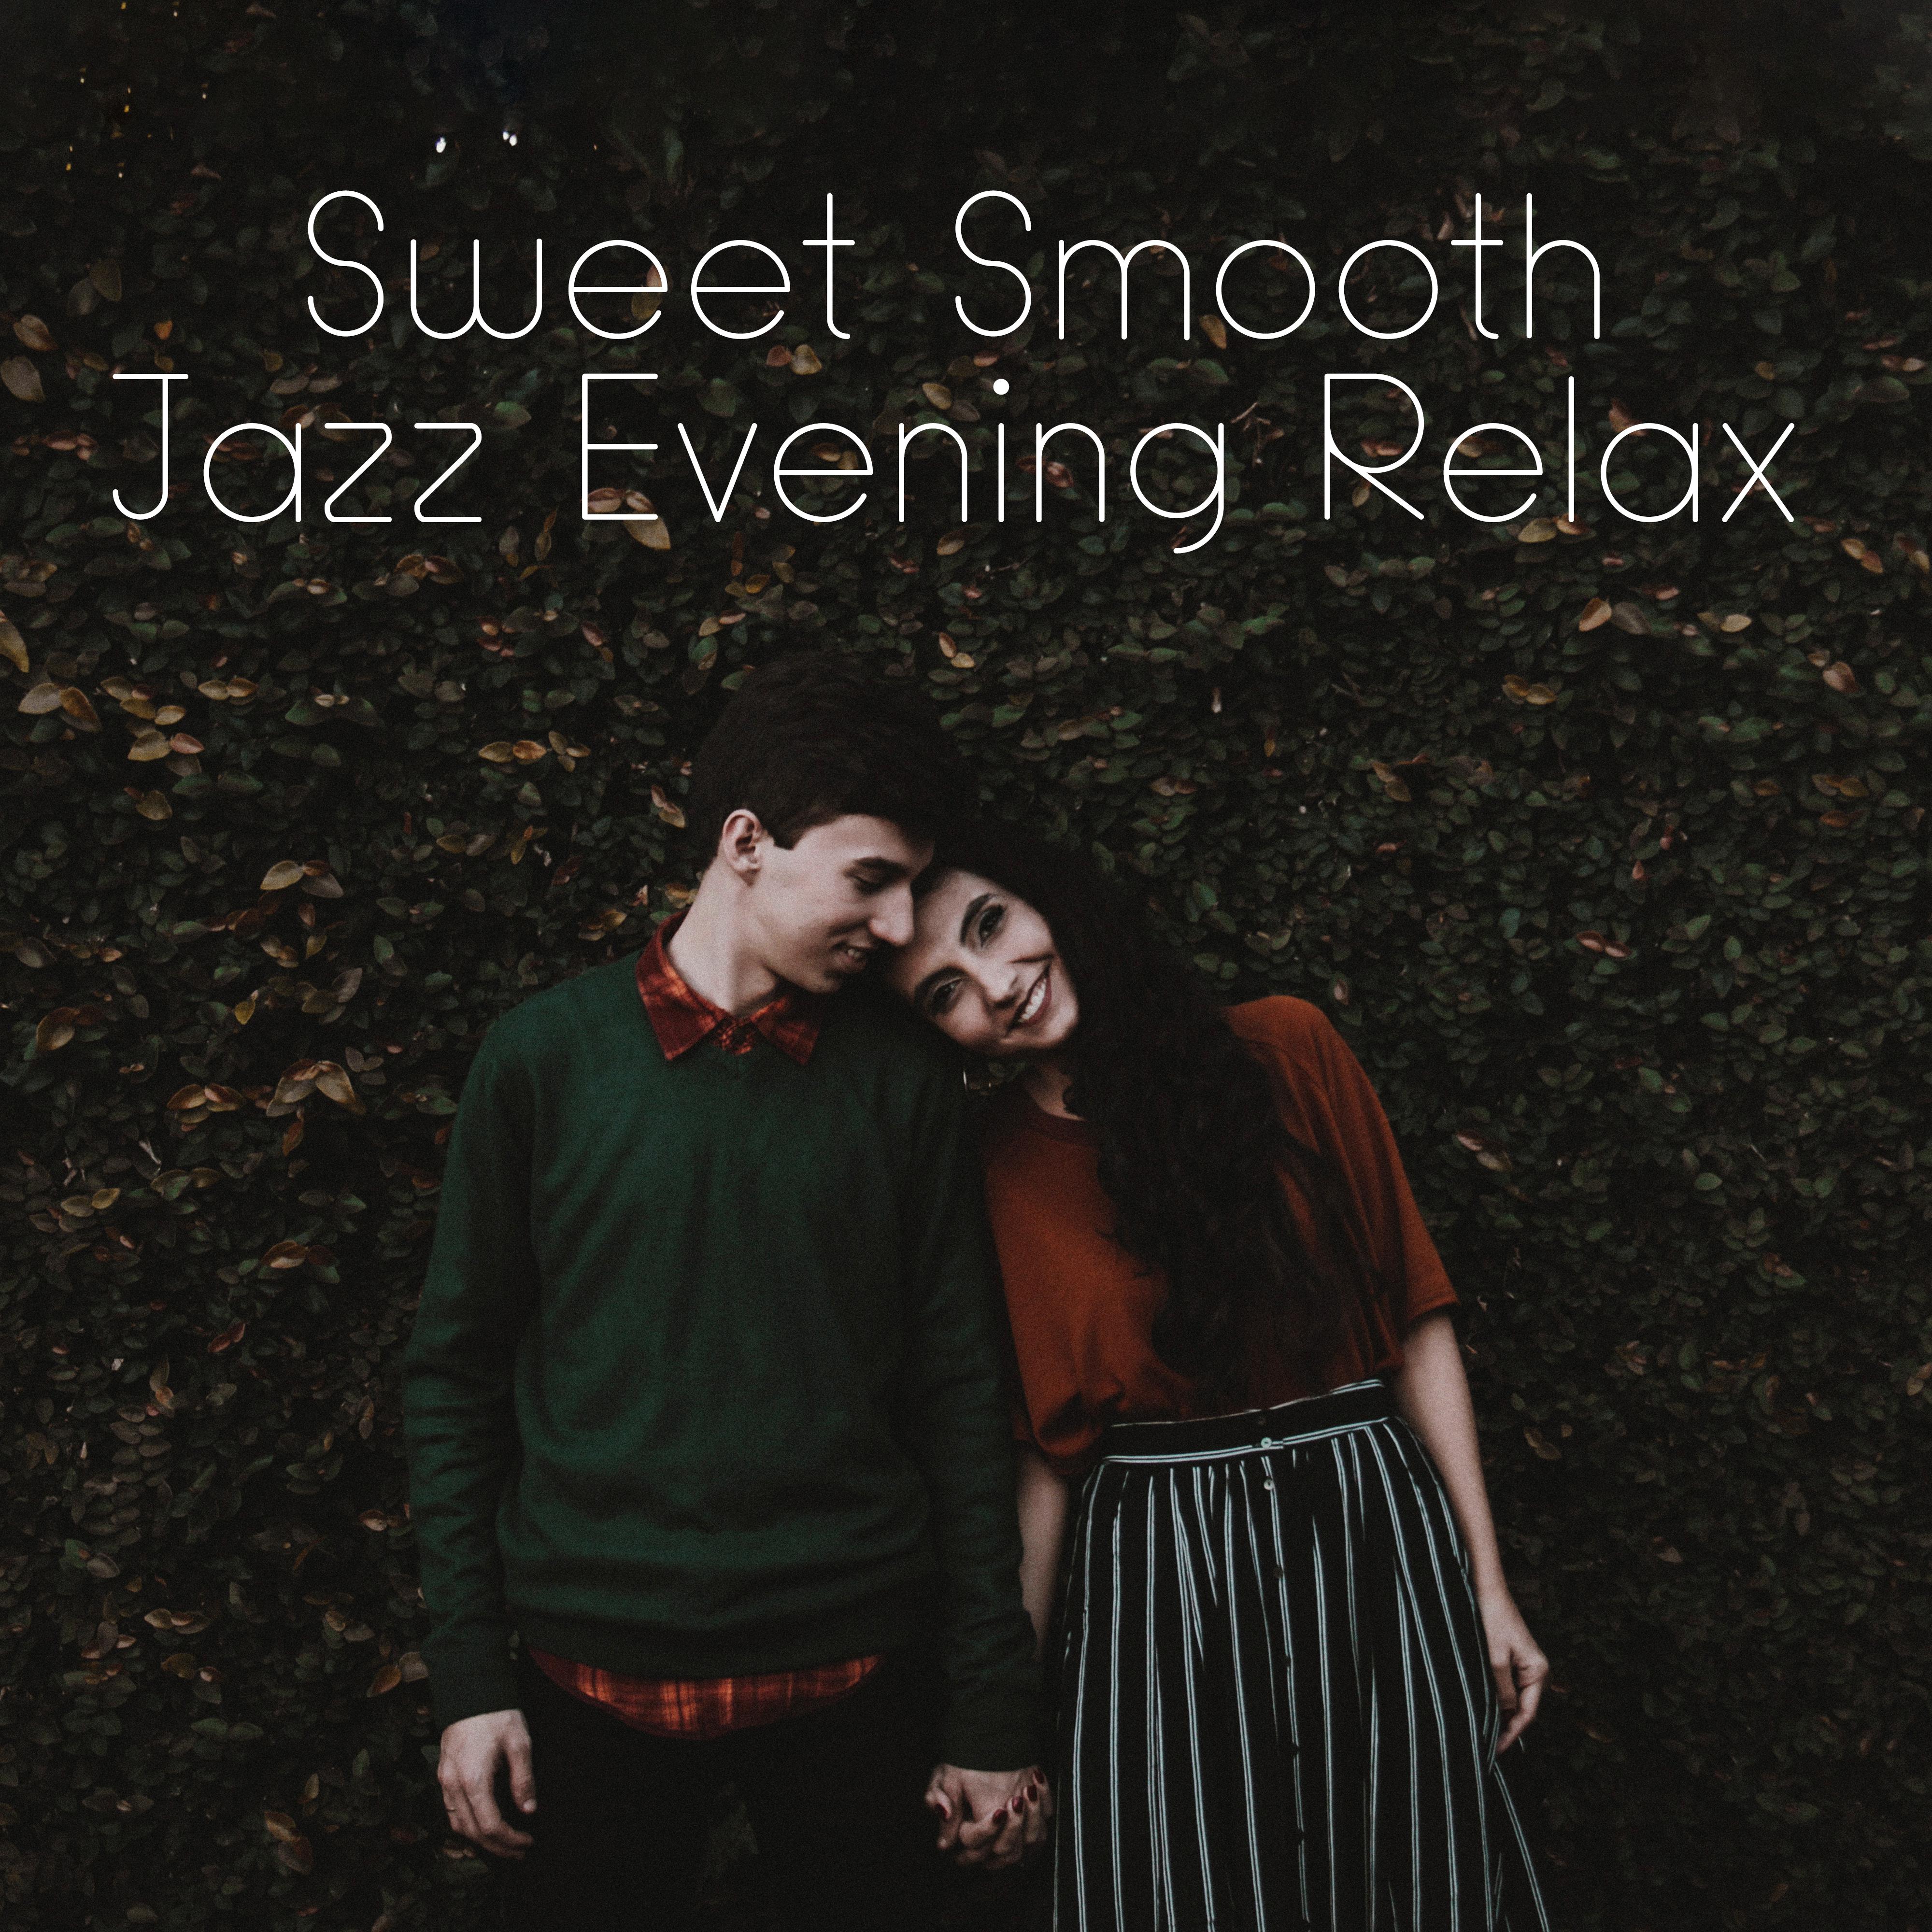 Sweet Smooth Jazz Evening Relax